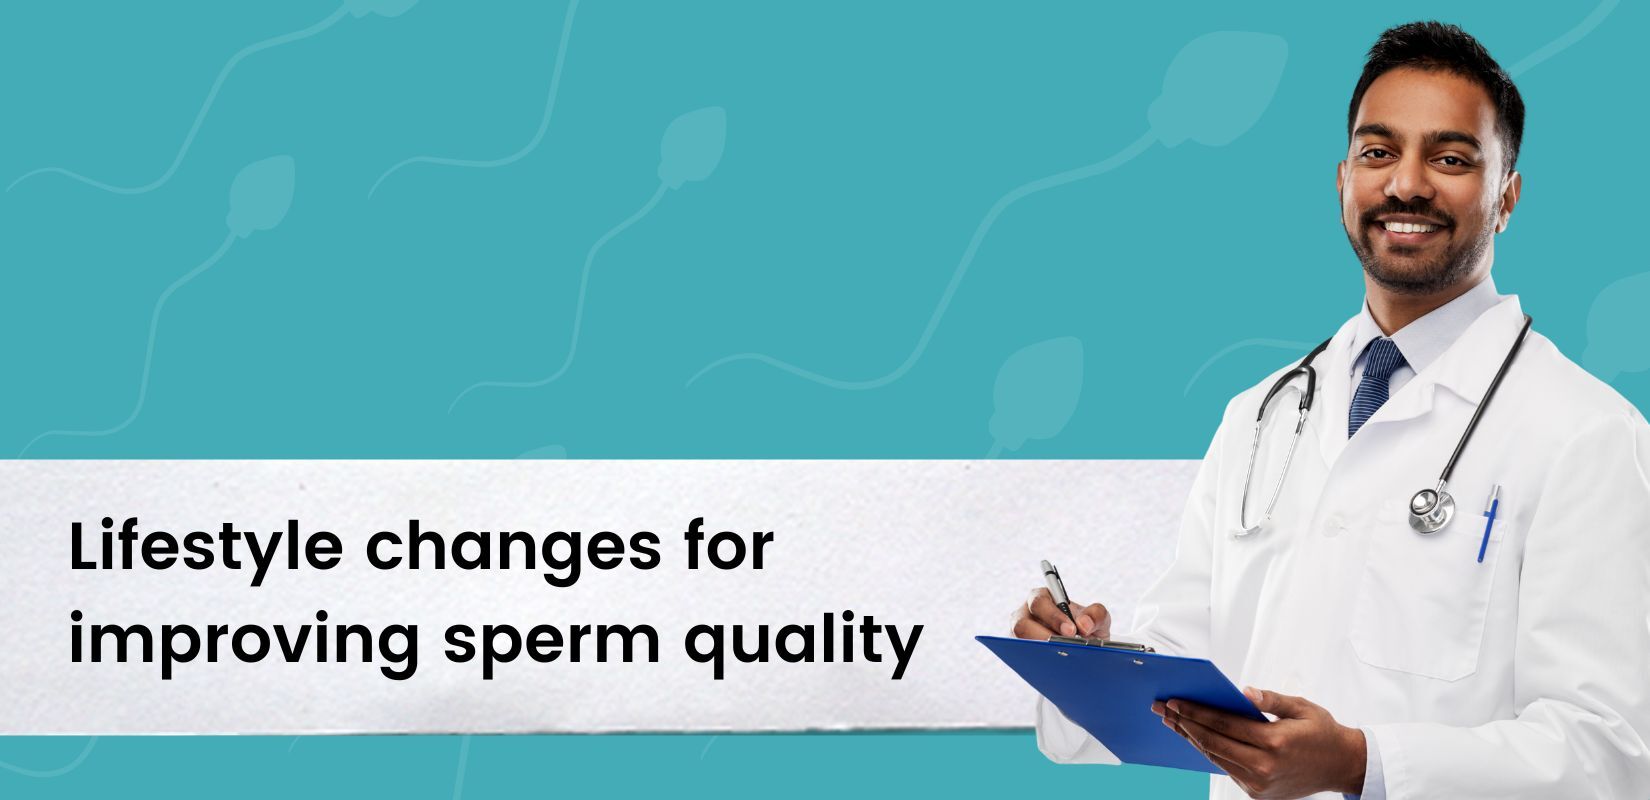 Lifestyle changes for improving sperm quality